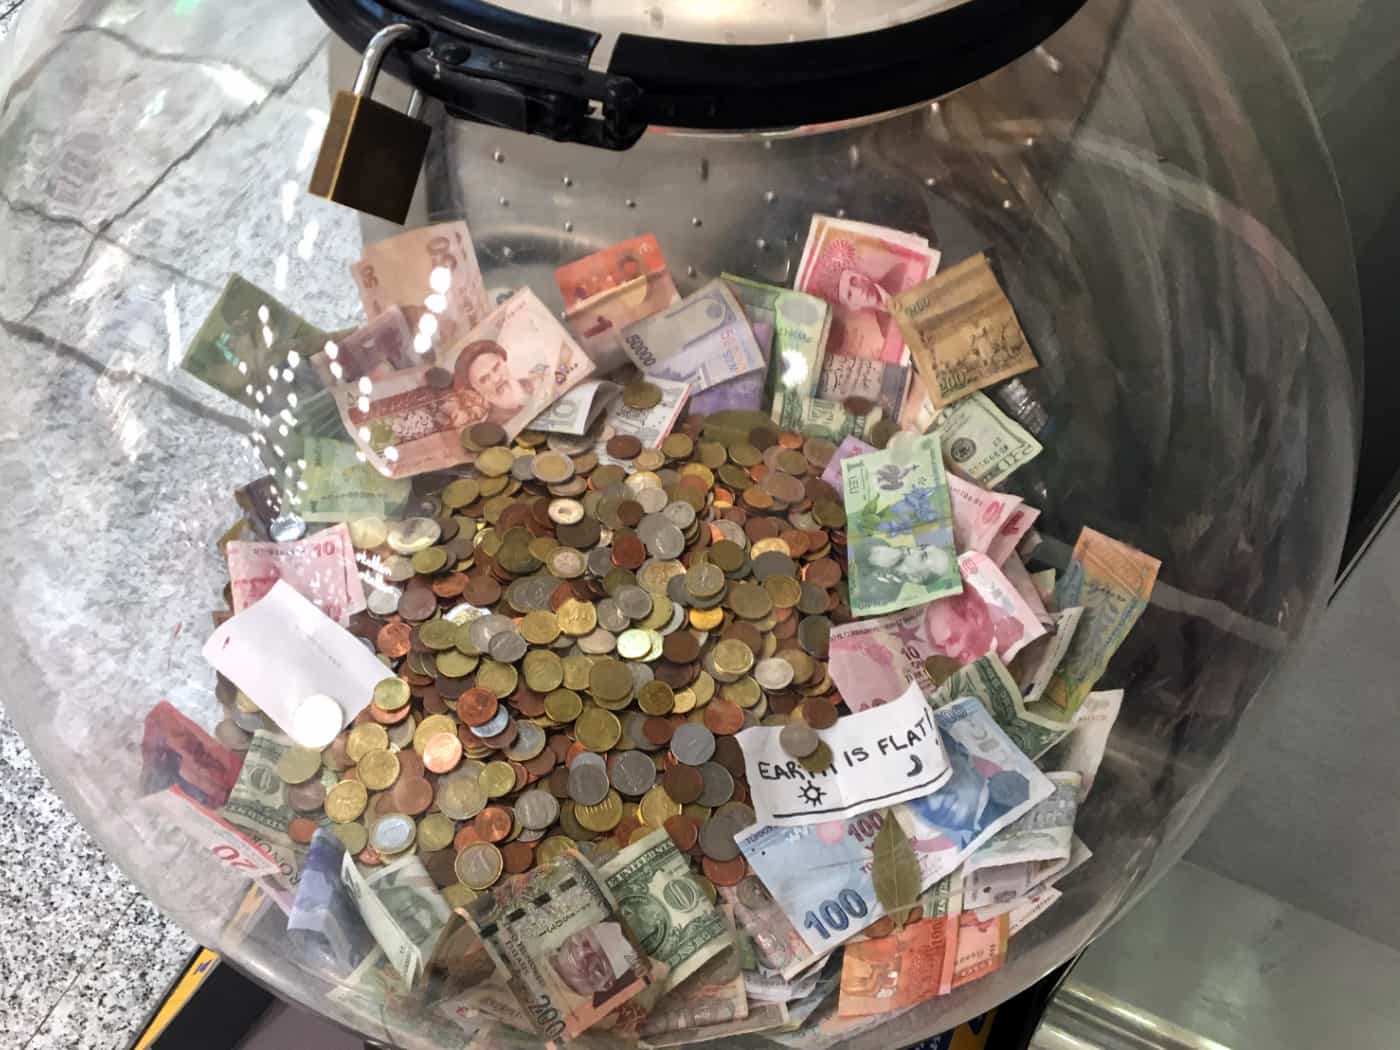 Charity donation box for leftover currency at the airport.